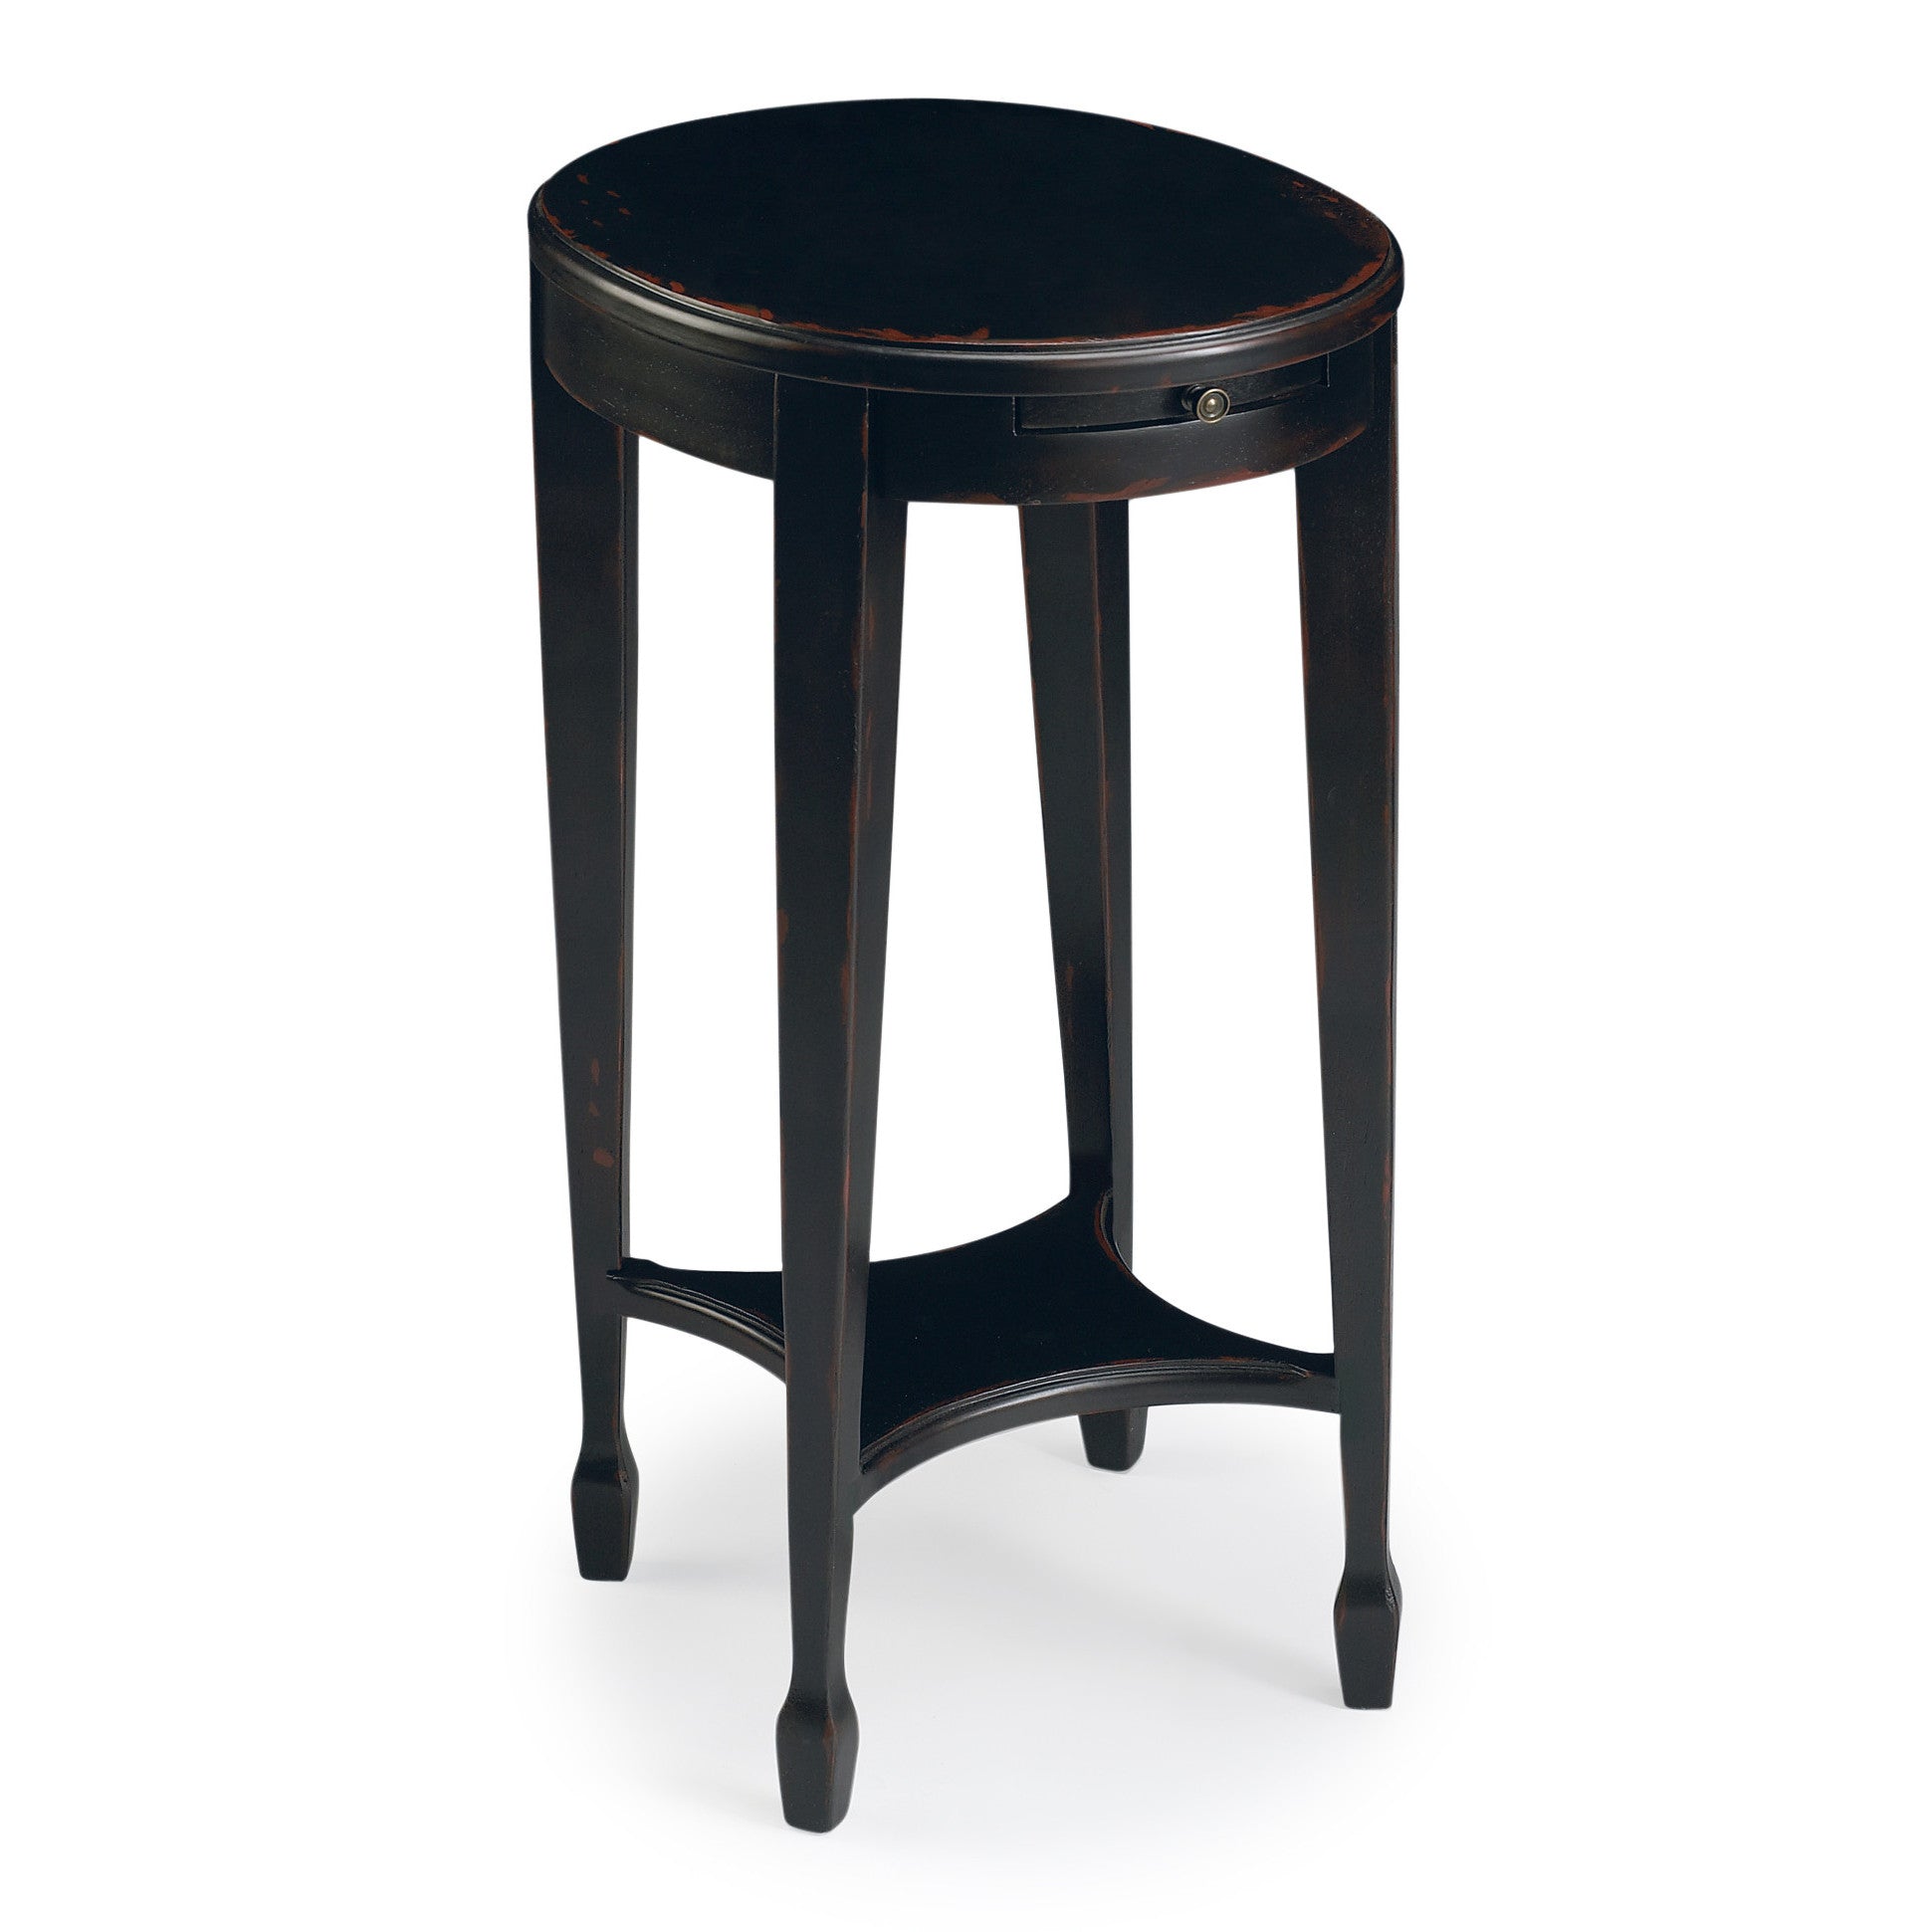 26" Rustic Black Manufactured Wood Oval End Table With Shelf